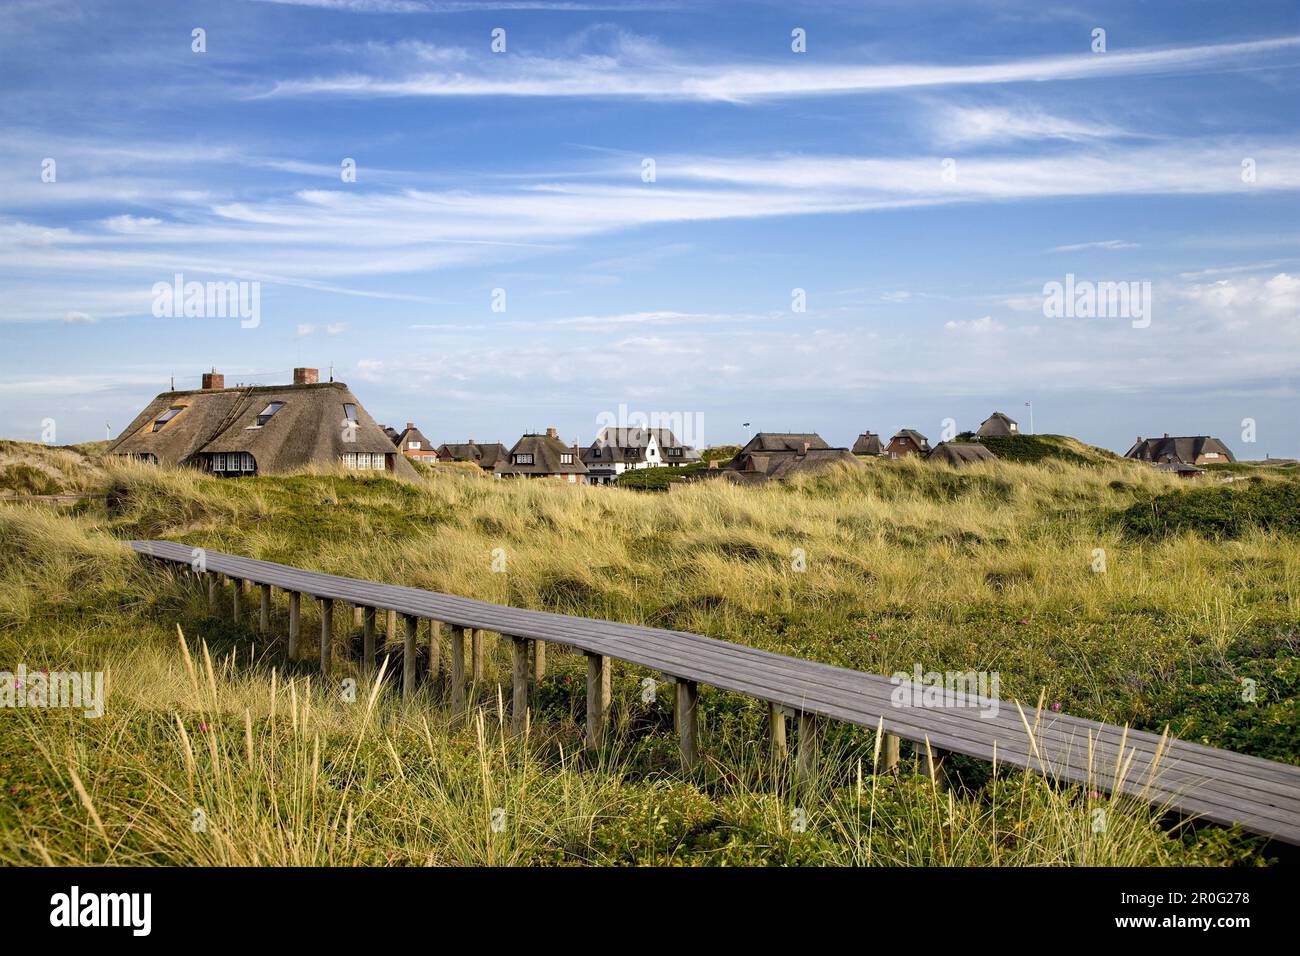 Thatched houses in dunes, Rantum, Sylt Island, Schleswig-Holstein, Germany Stock Photo